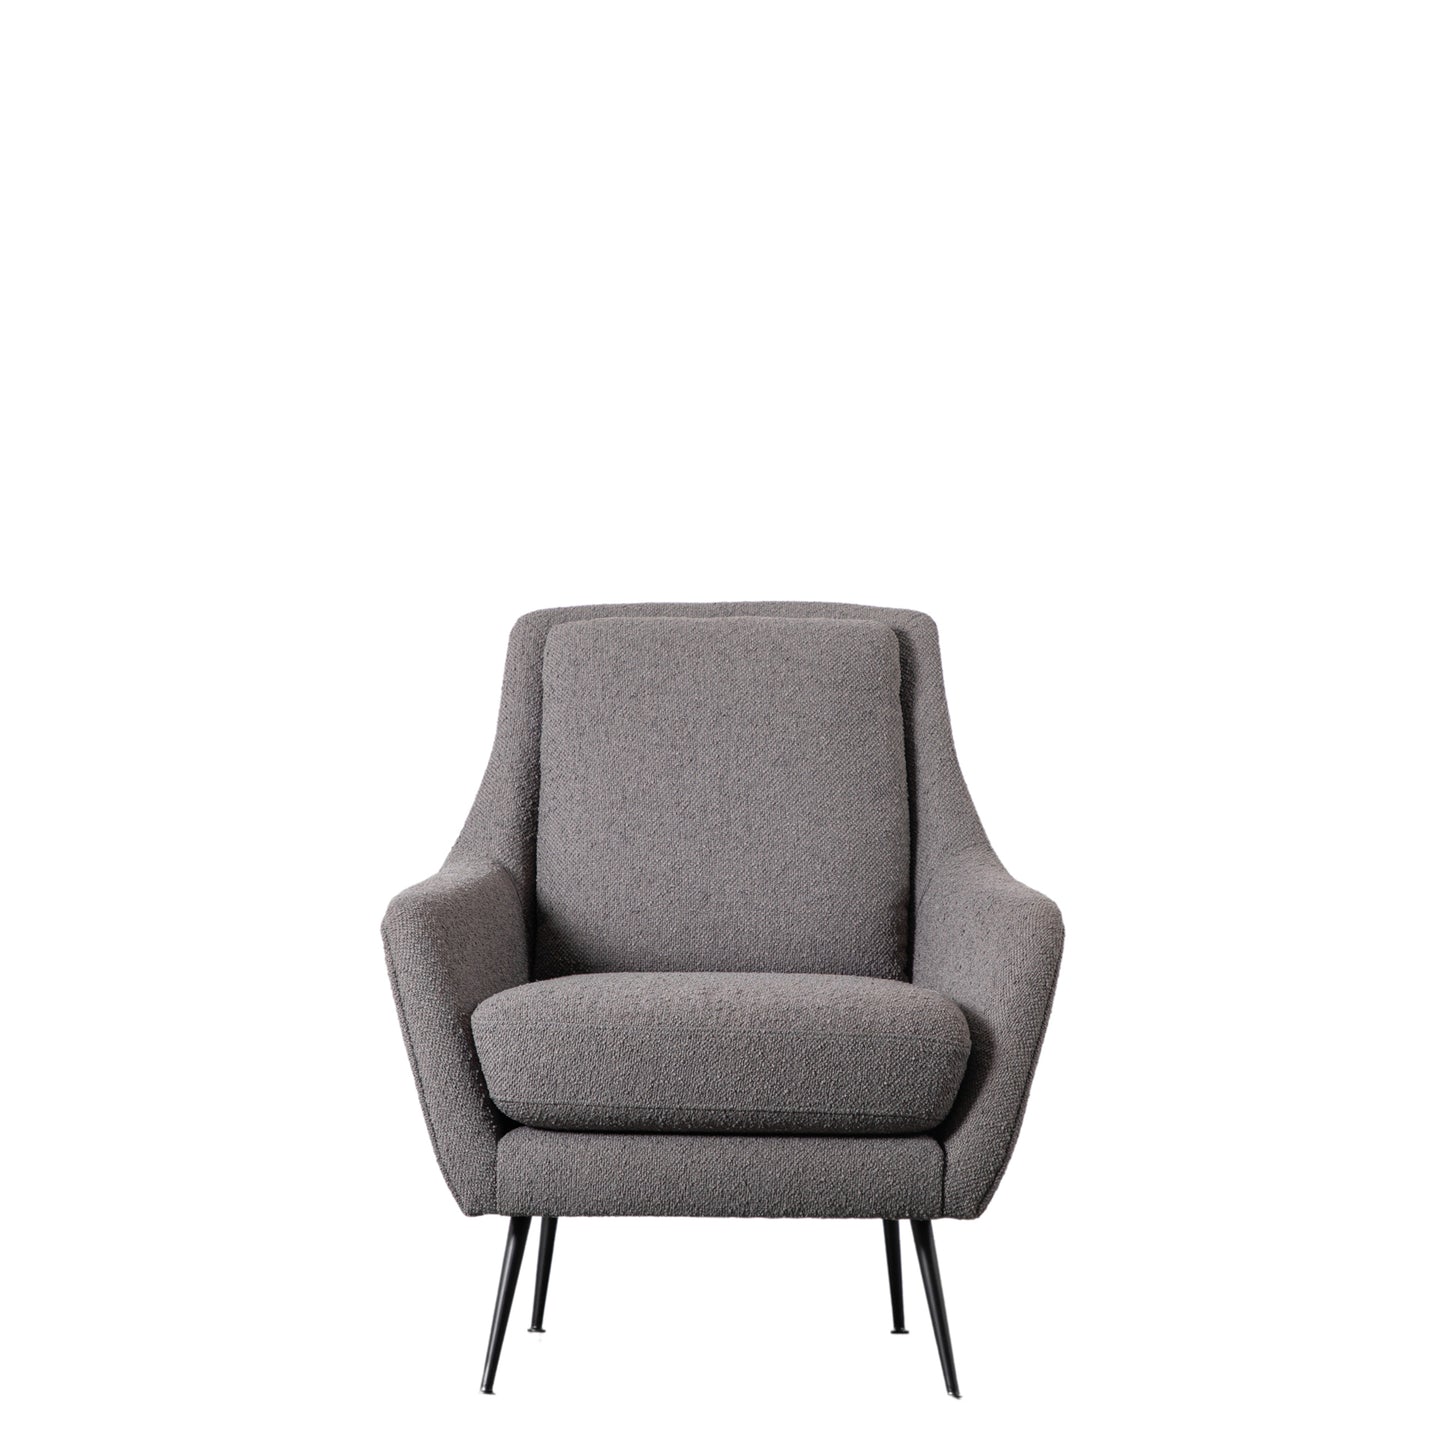 A Brompton Armchair in Dark Grey Linen, available at Kikiathome.co.uk, perfect for interior decor and home furniture.